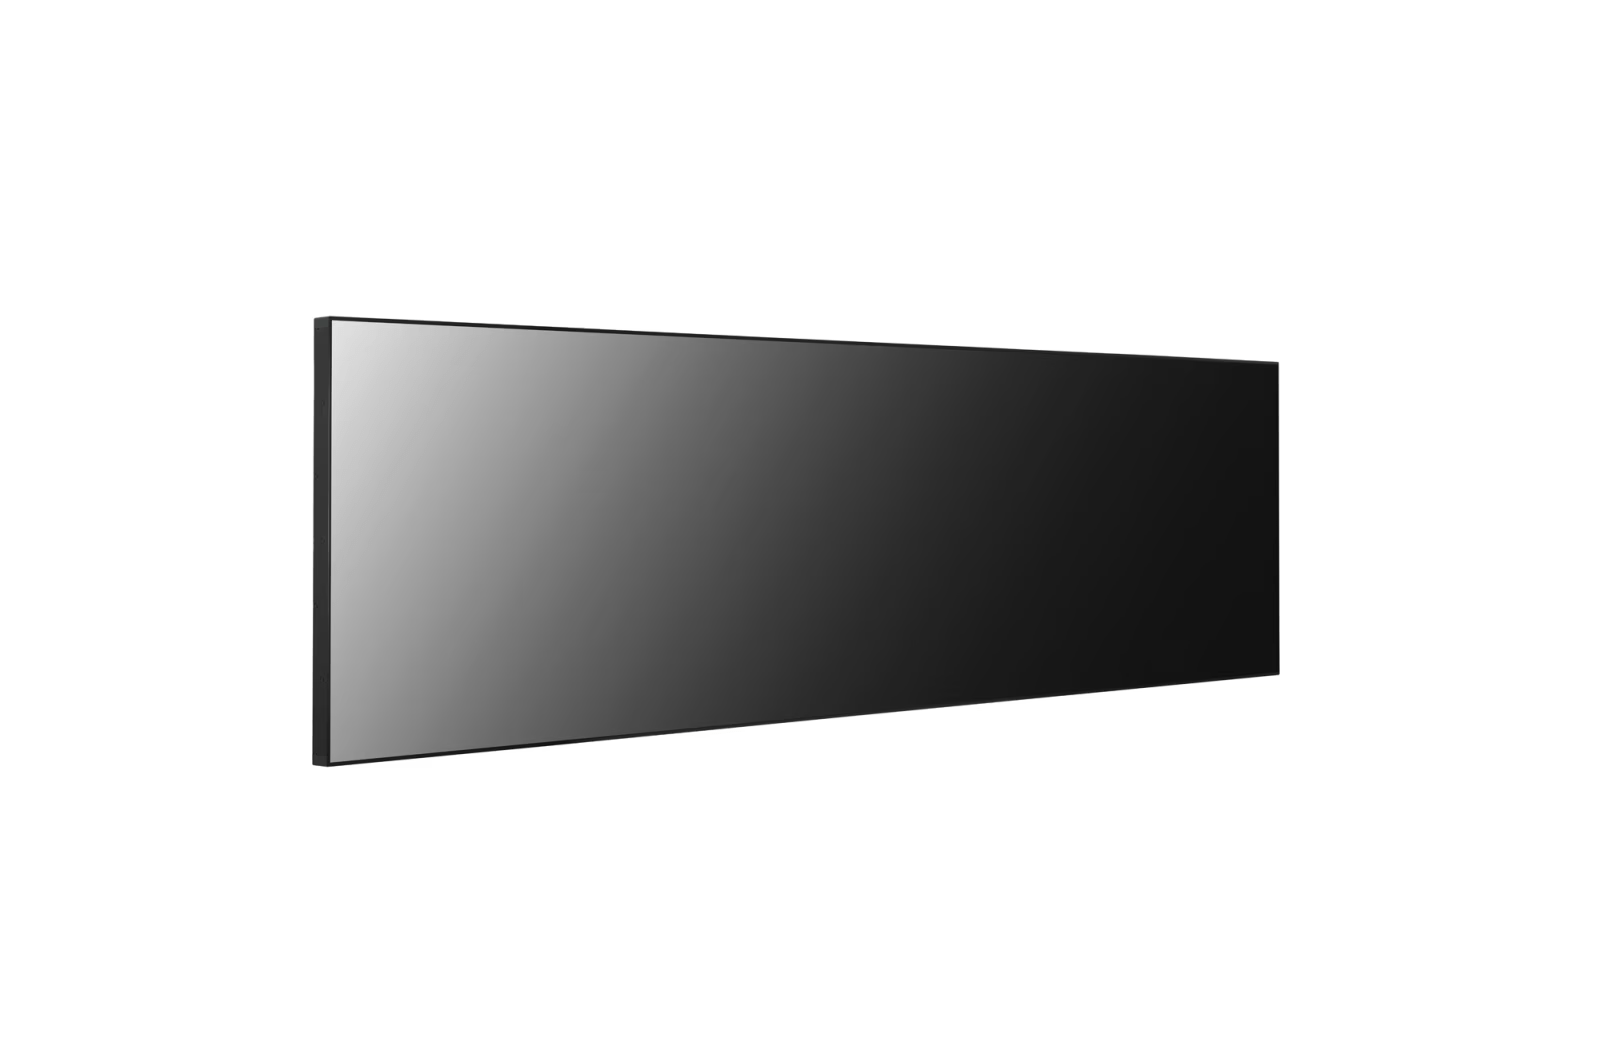 88inch Ultra Stretch IPS Display - DNR retail signage displays for sale